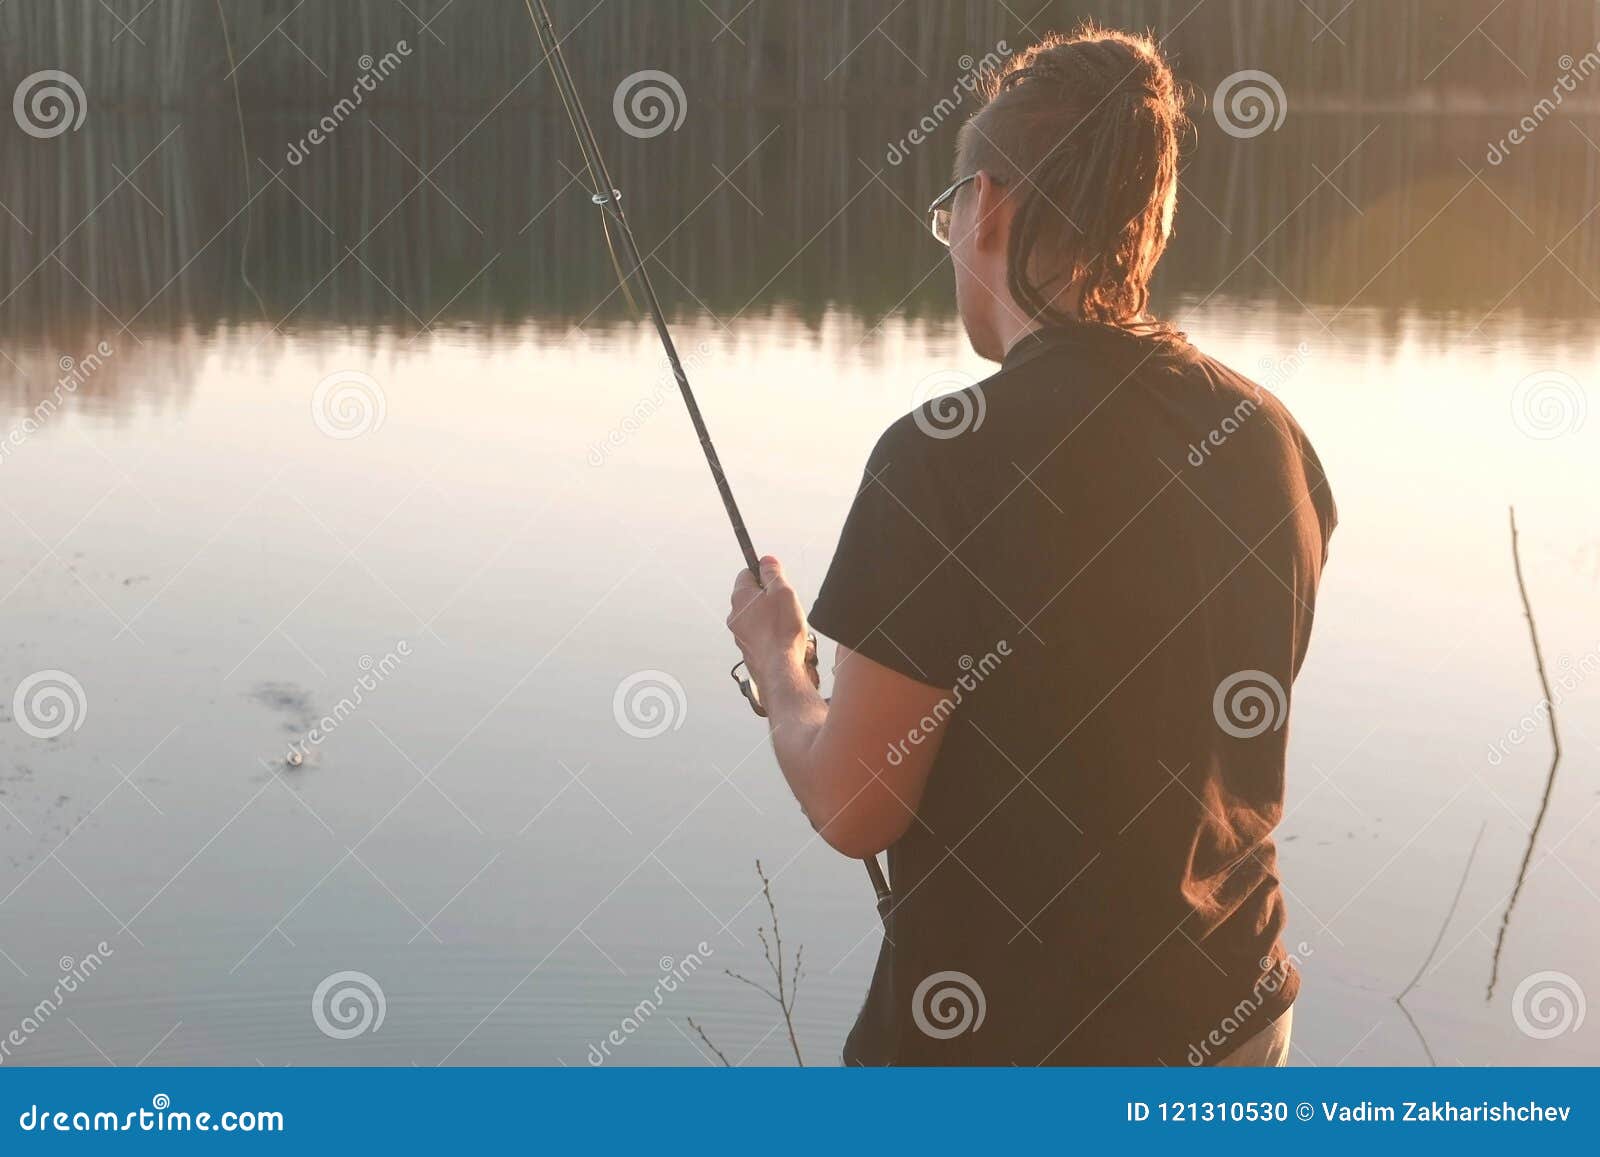 Fisherman on the pond. Young guy with dreads in glasses in a t-shirt  fishing fish with rod. Stock Photo